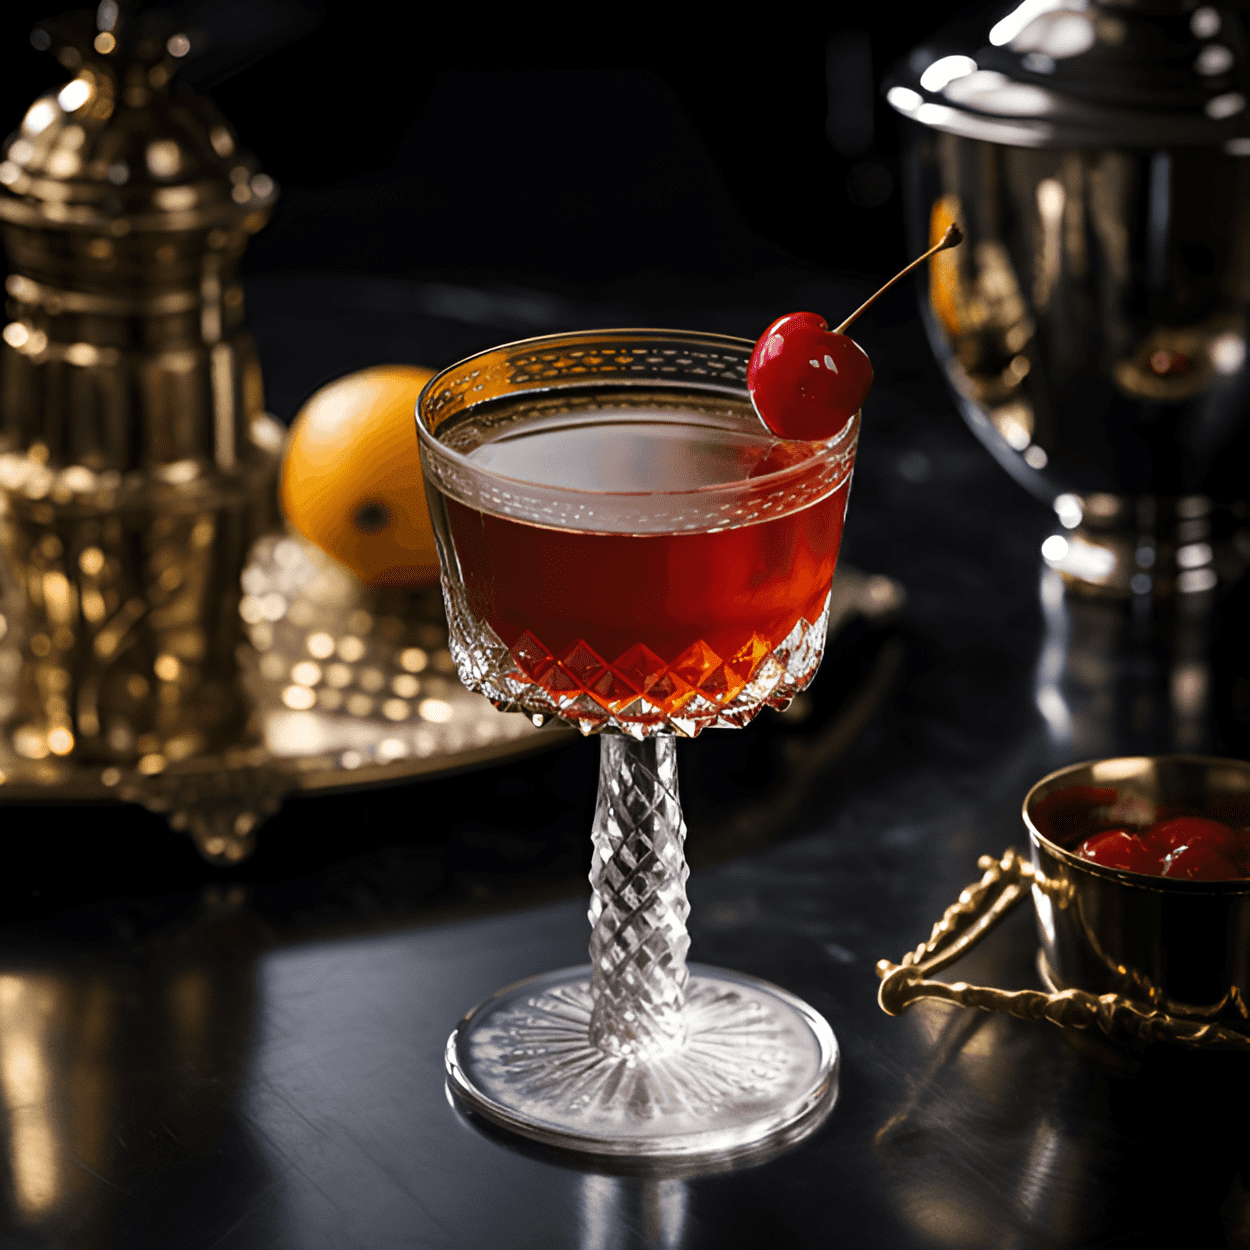 Queen Anne Cocktail Recipe - The Queen Anne cocktail offers a harmonious balance of flavors, with a slightly sweet and fruity taste, complemented by a hint of bitterness from the vermouth. The overall taste is smooth, rich, and velvety, with a subtle warmth from the whiskey.